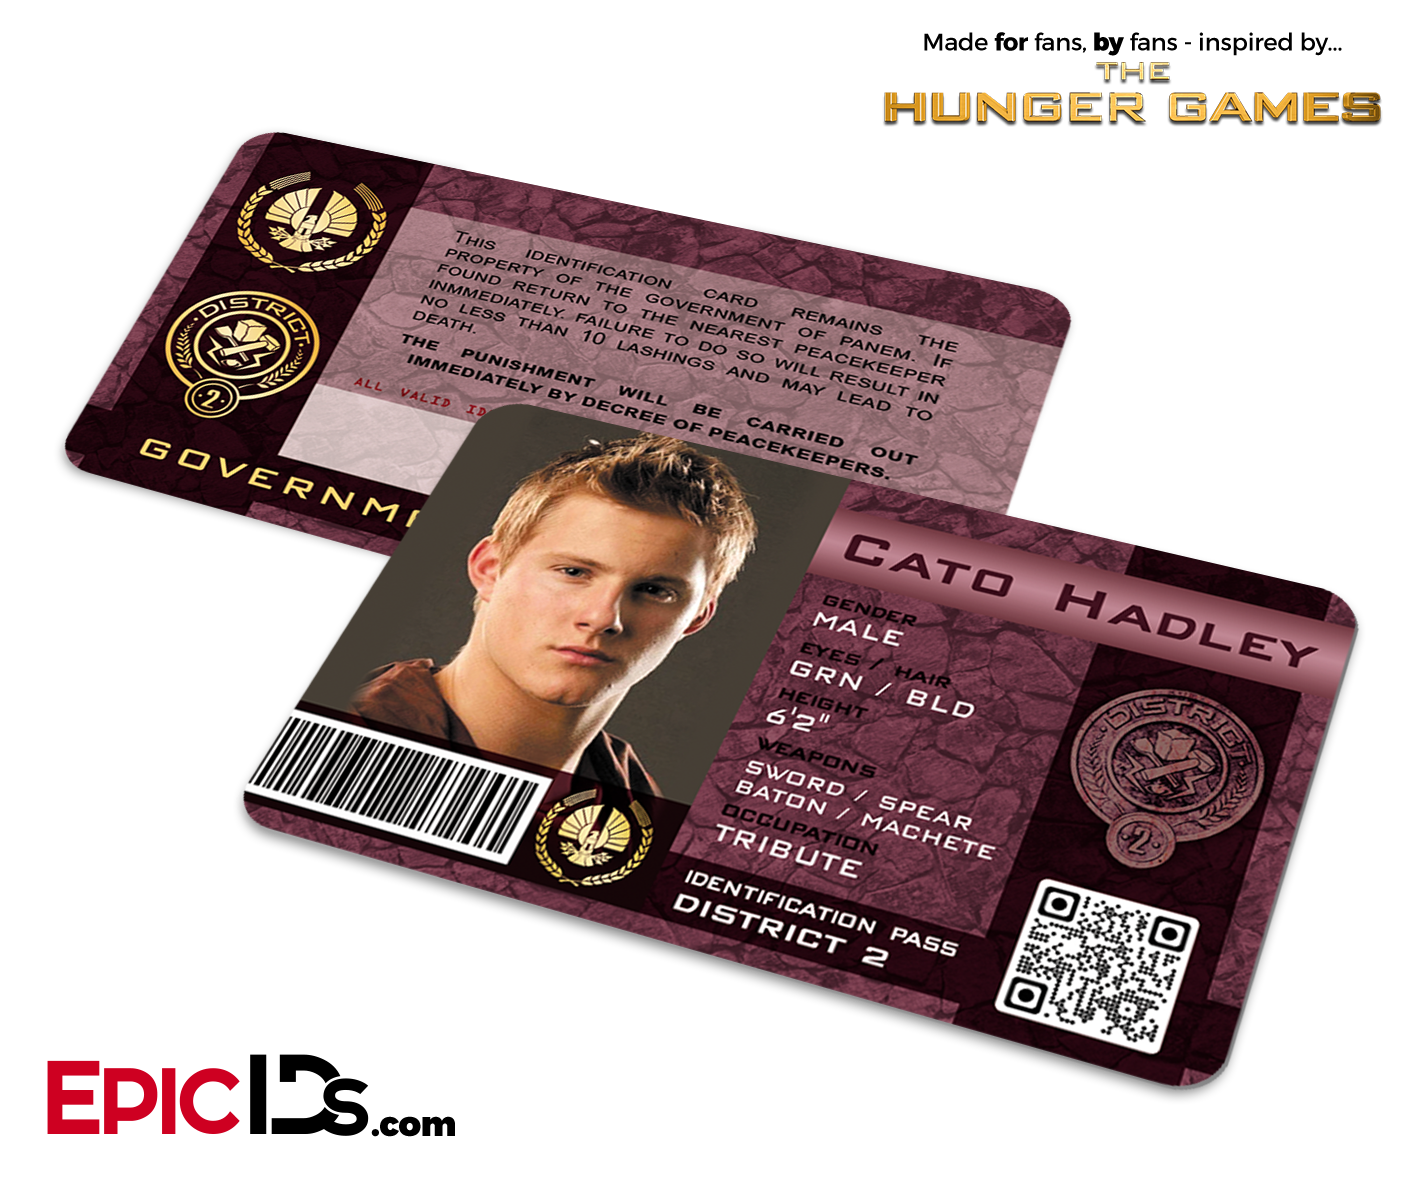 cato hunger games